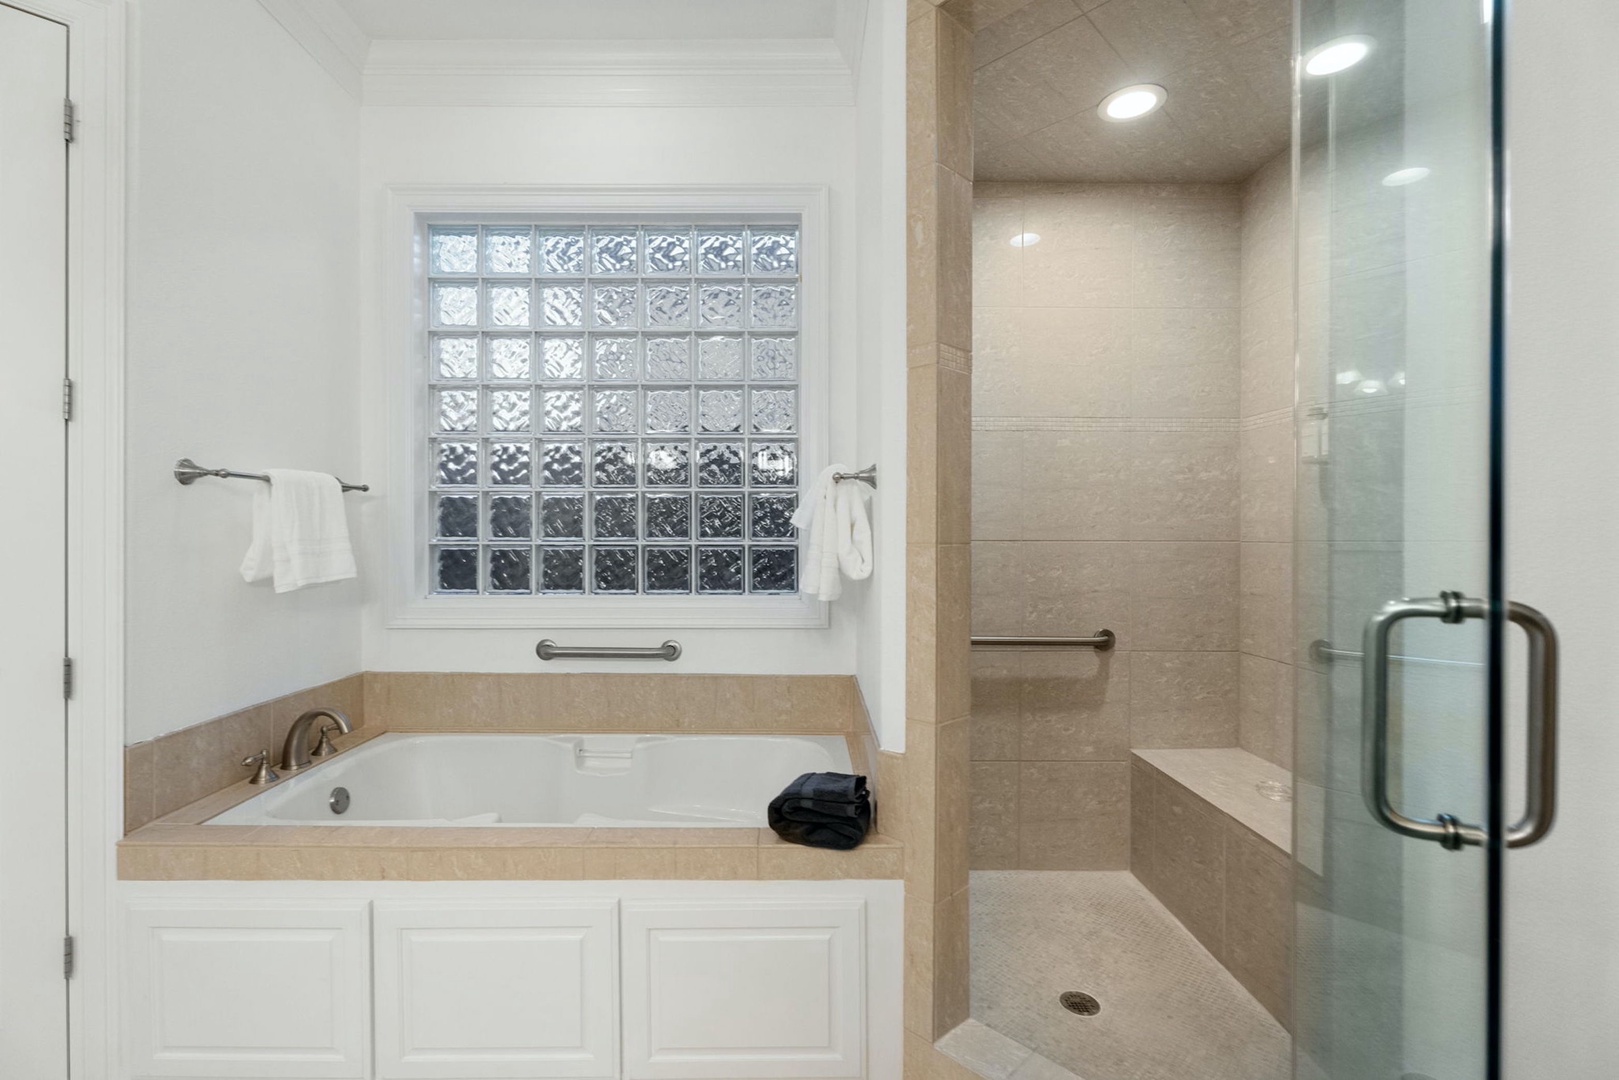 En-suite bathroom with separate shower, and soaking tub